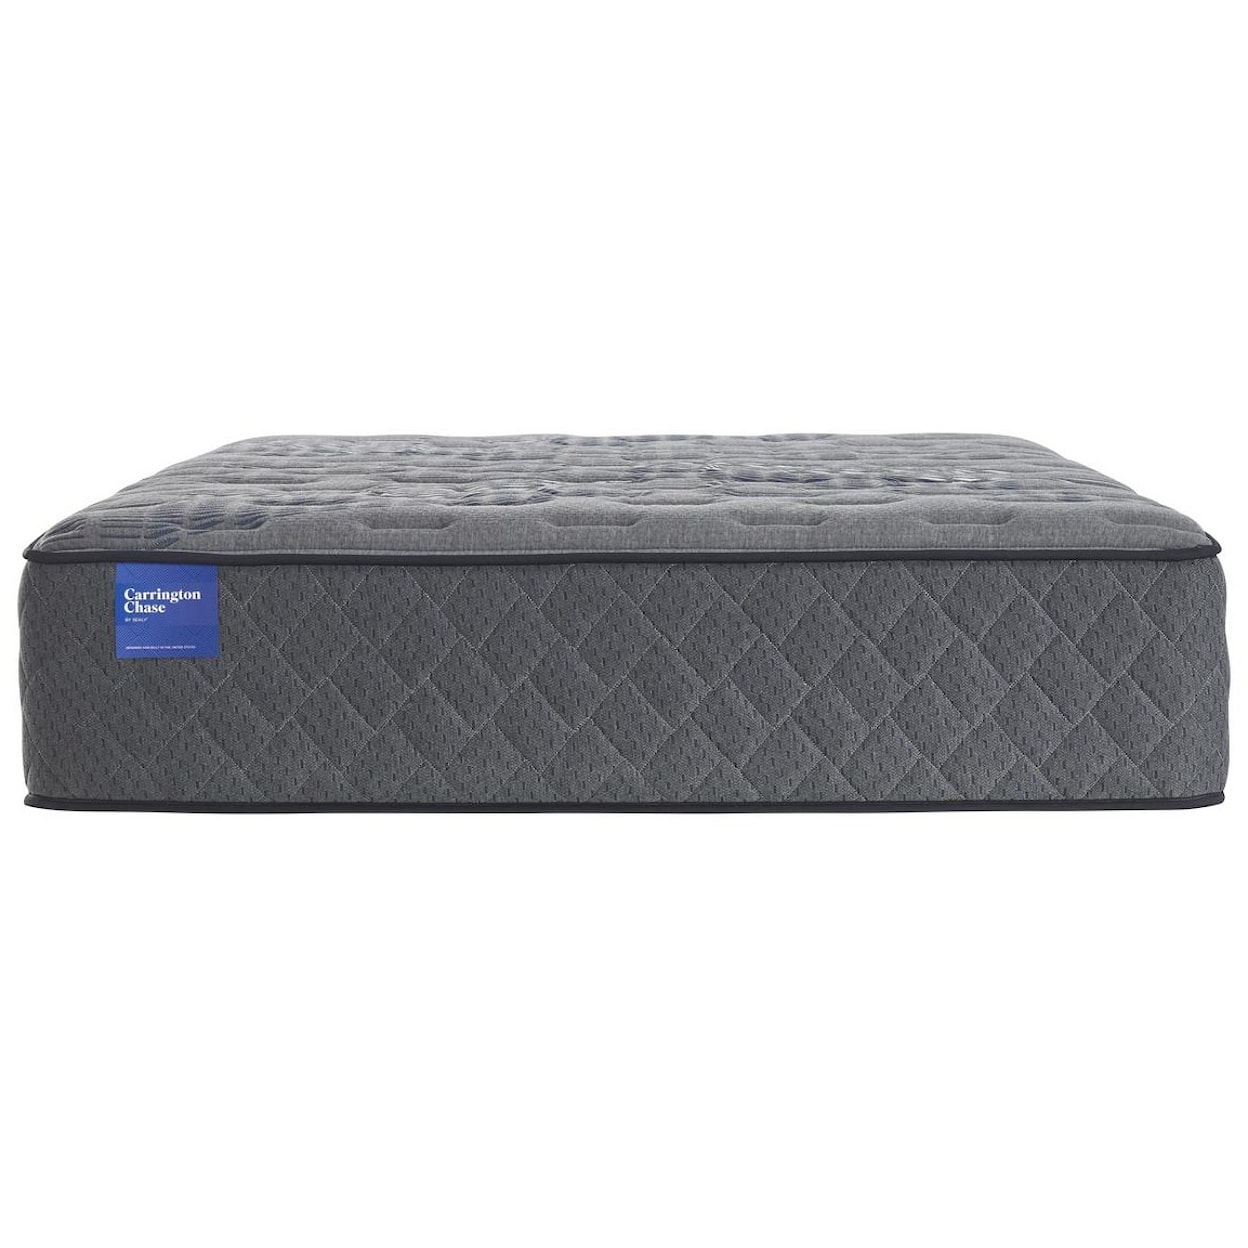 Sealy Sealy Posturepedic Launceton Firm Full Sealy 15" Firm Mattress